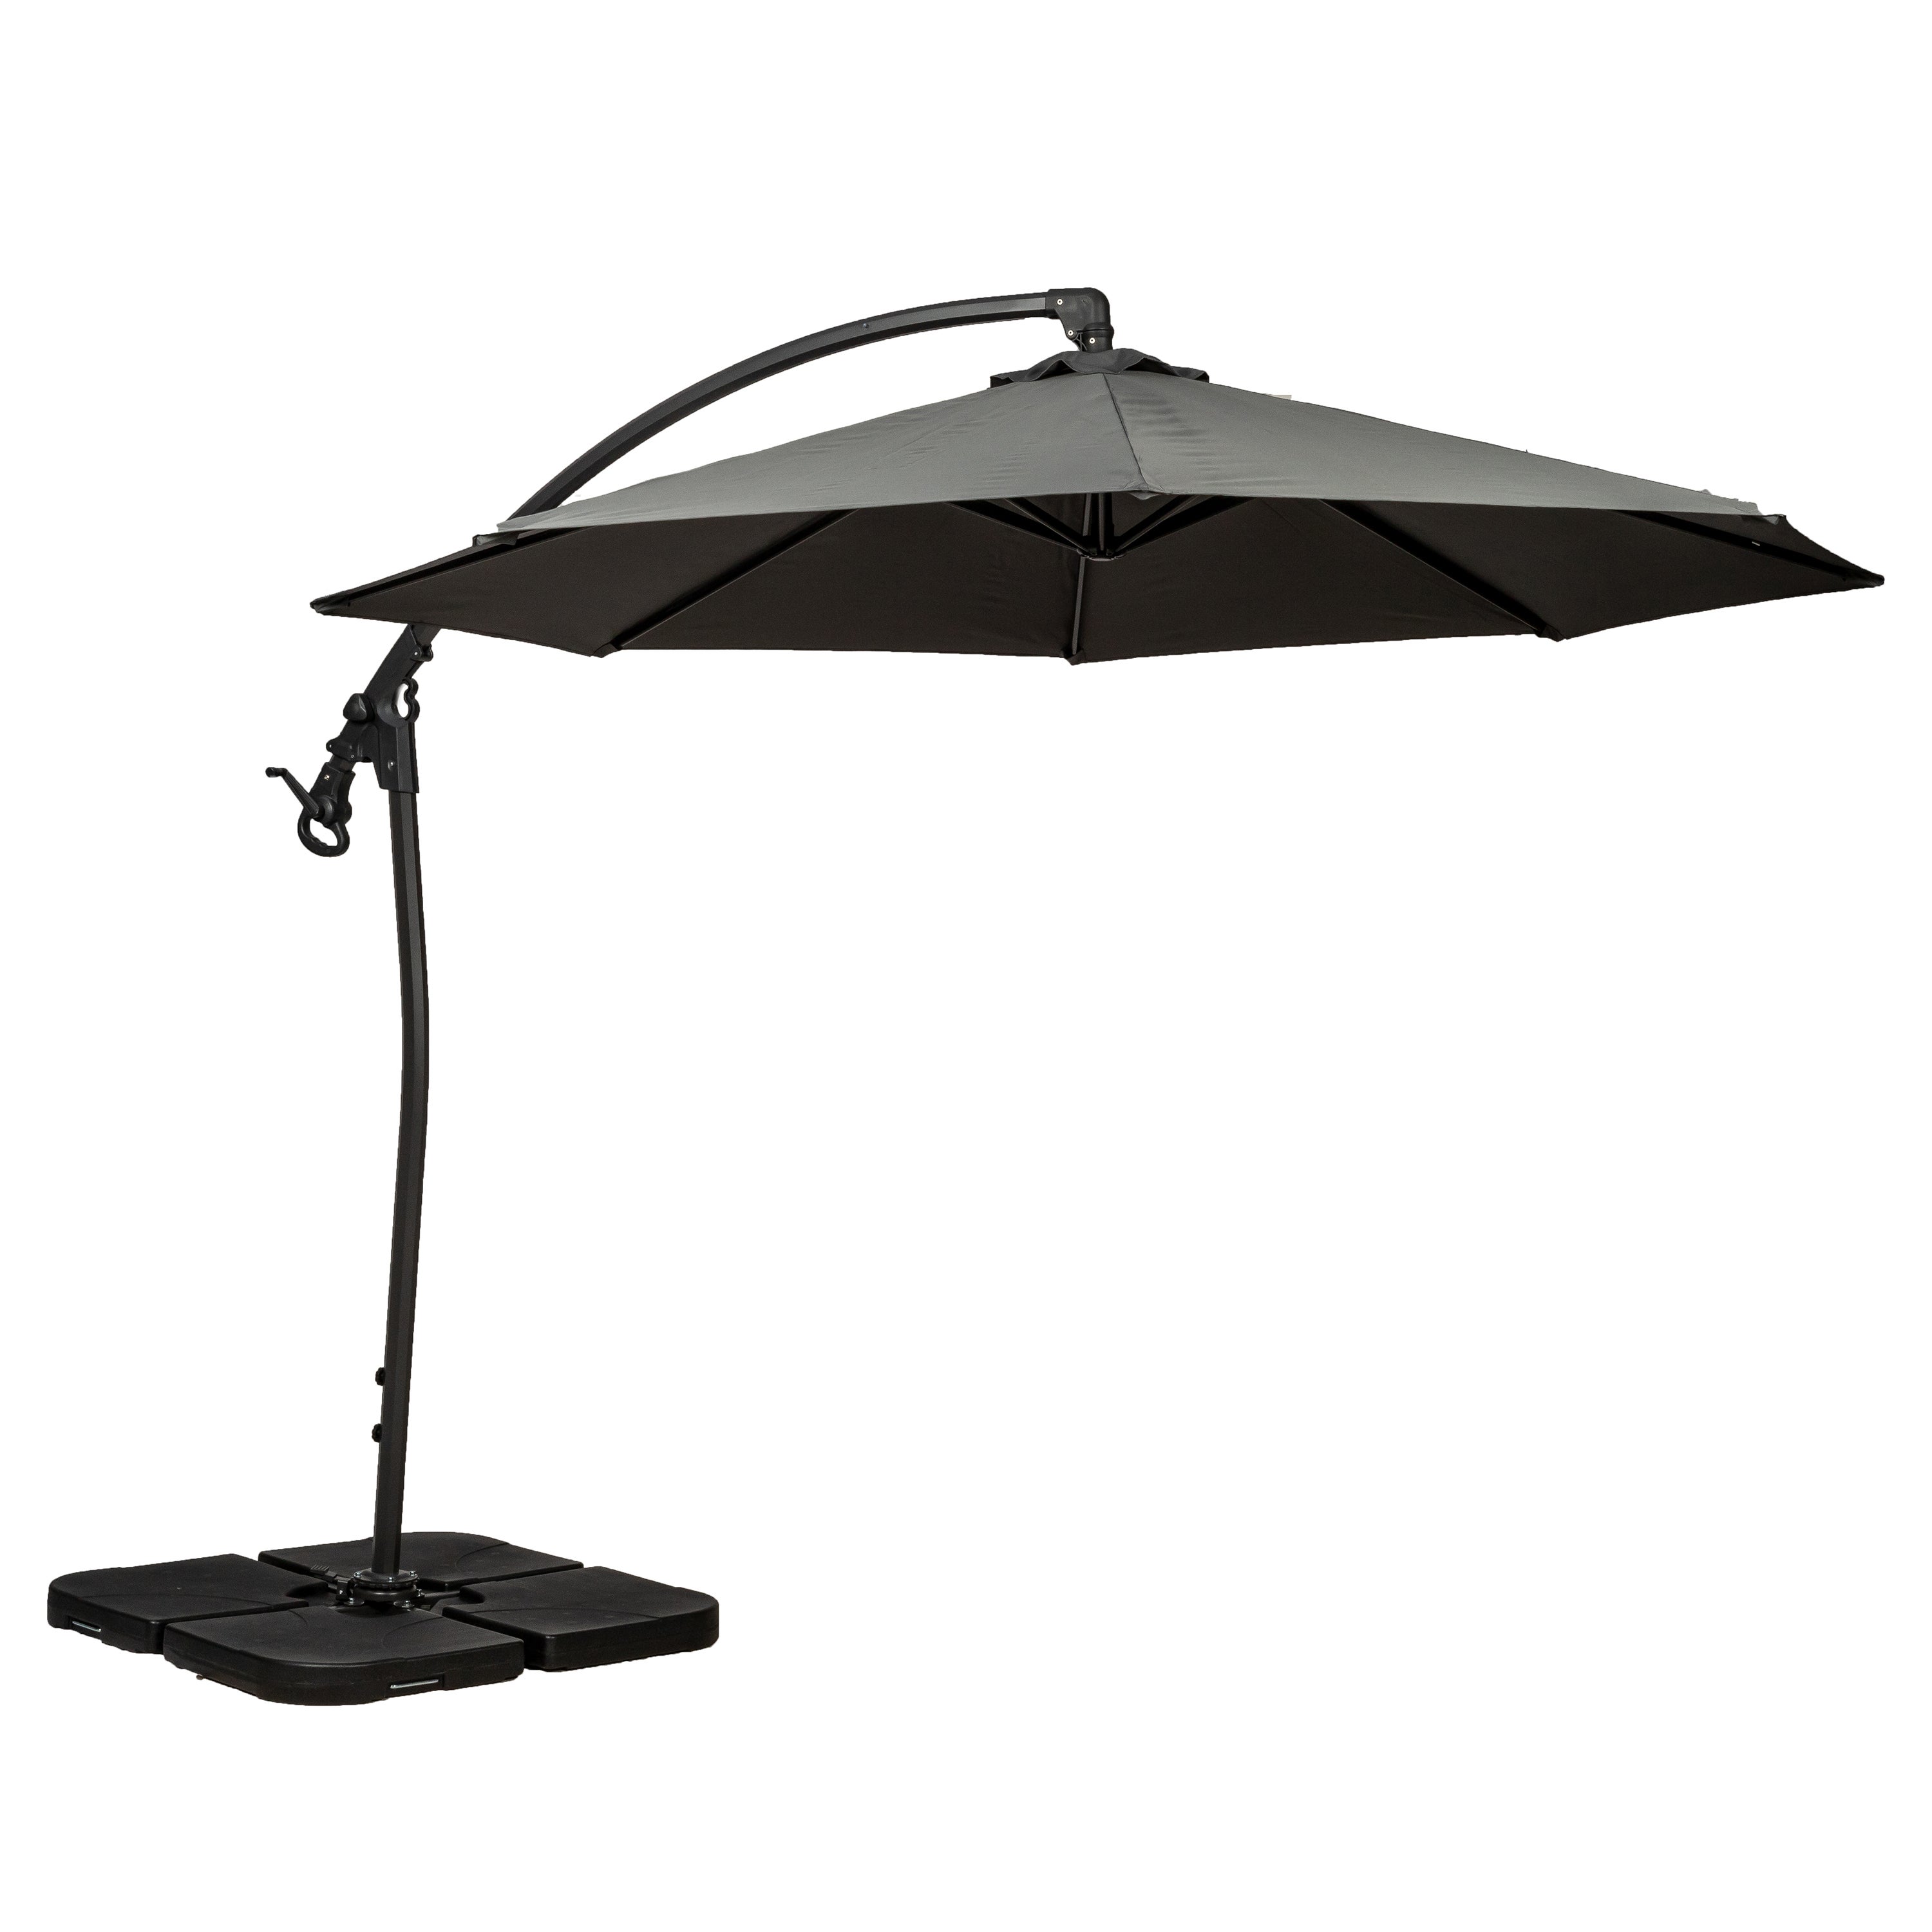 3m Deluxe Pedal Operated Rotational Cantilever Parasol with Cross Stand Cream